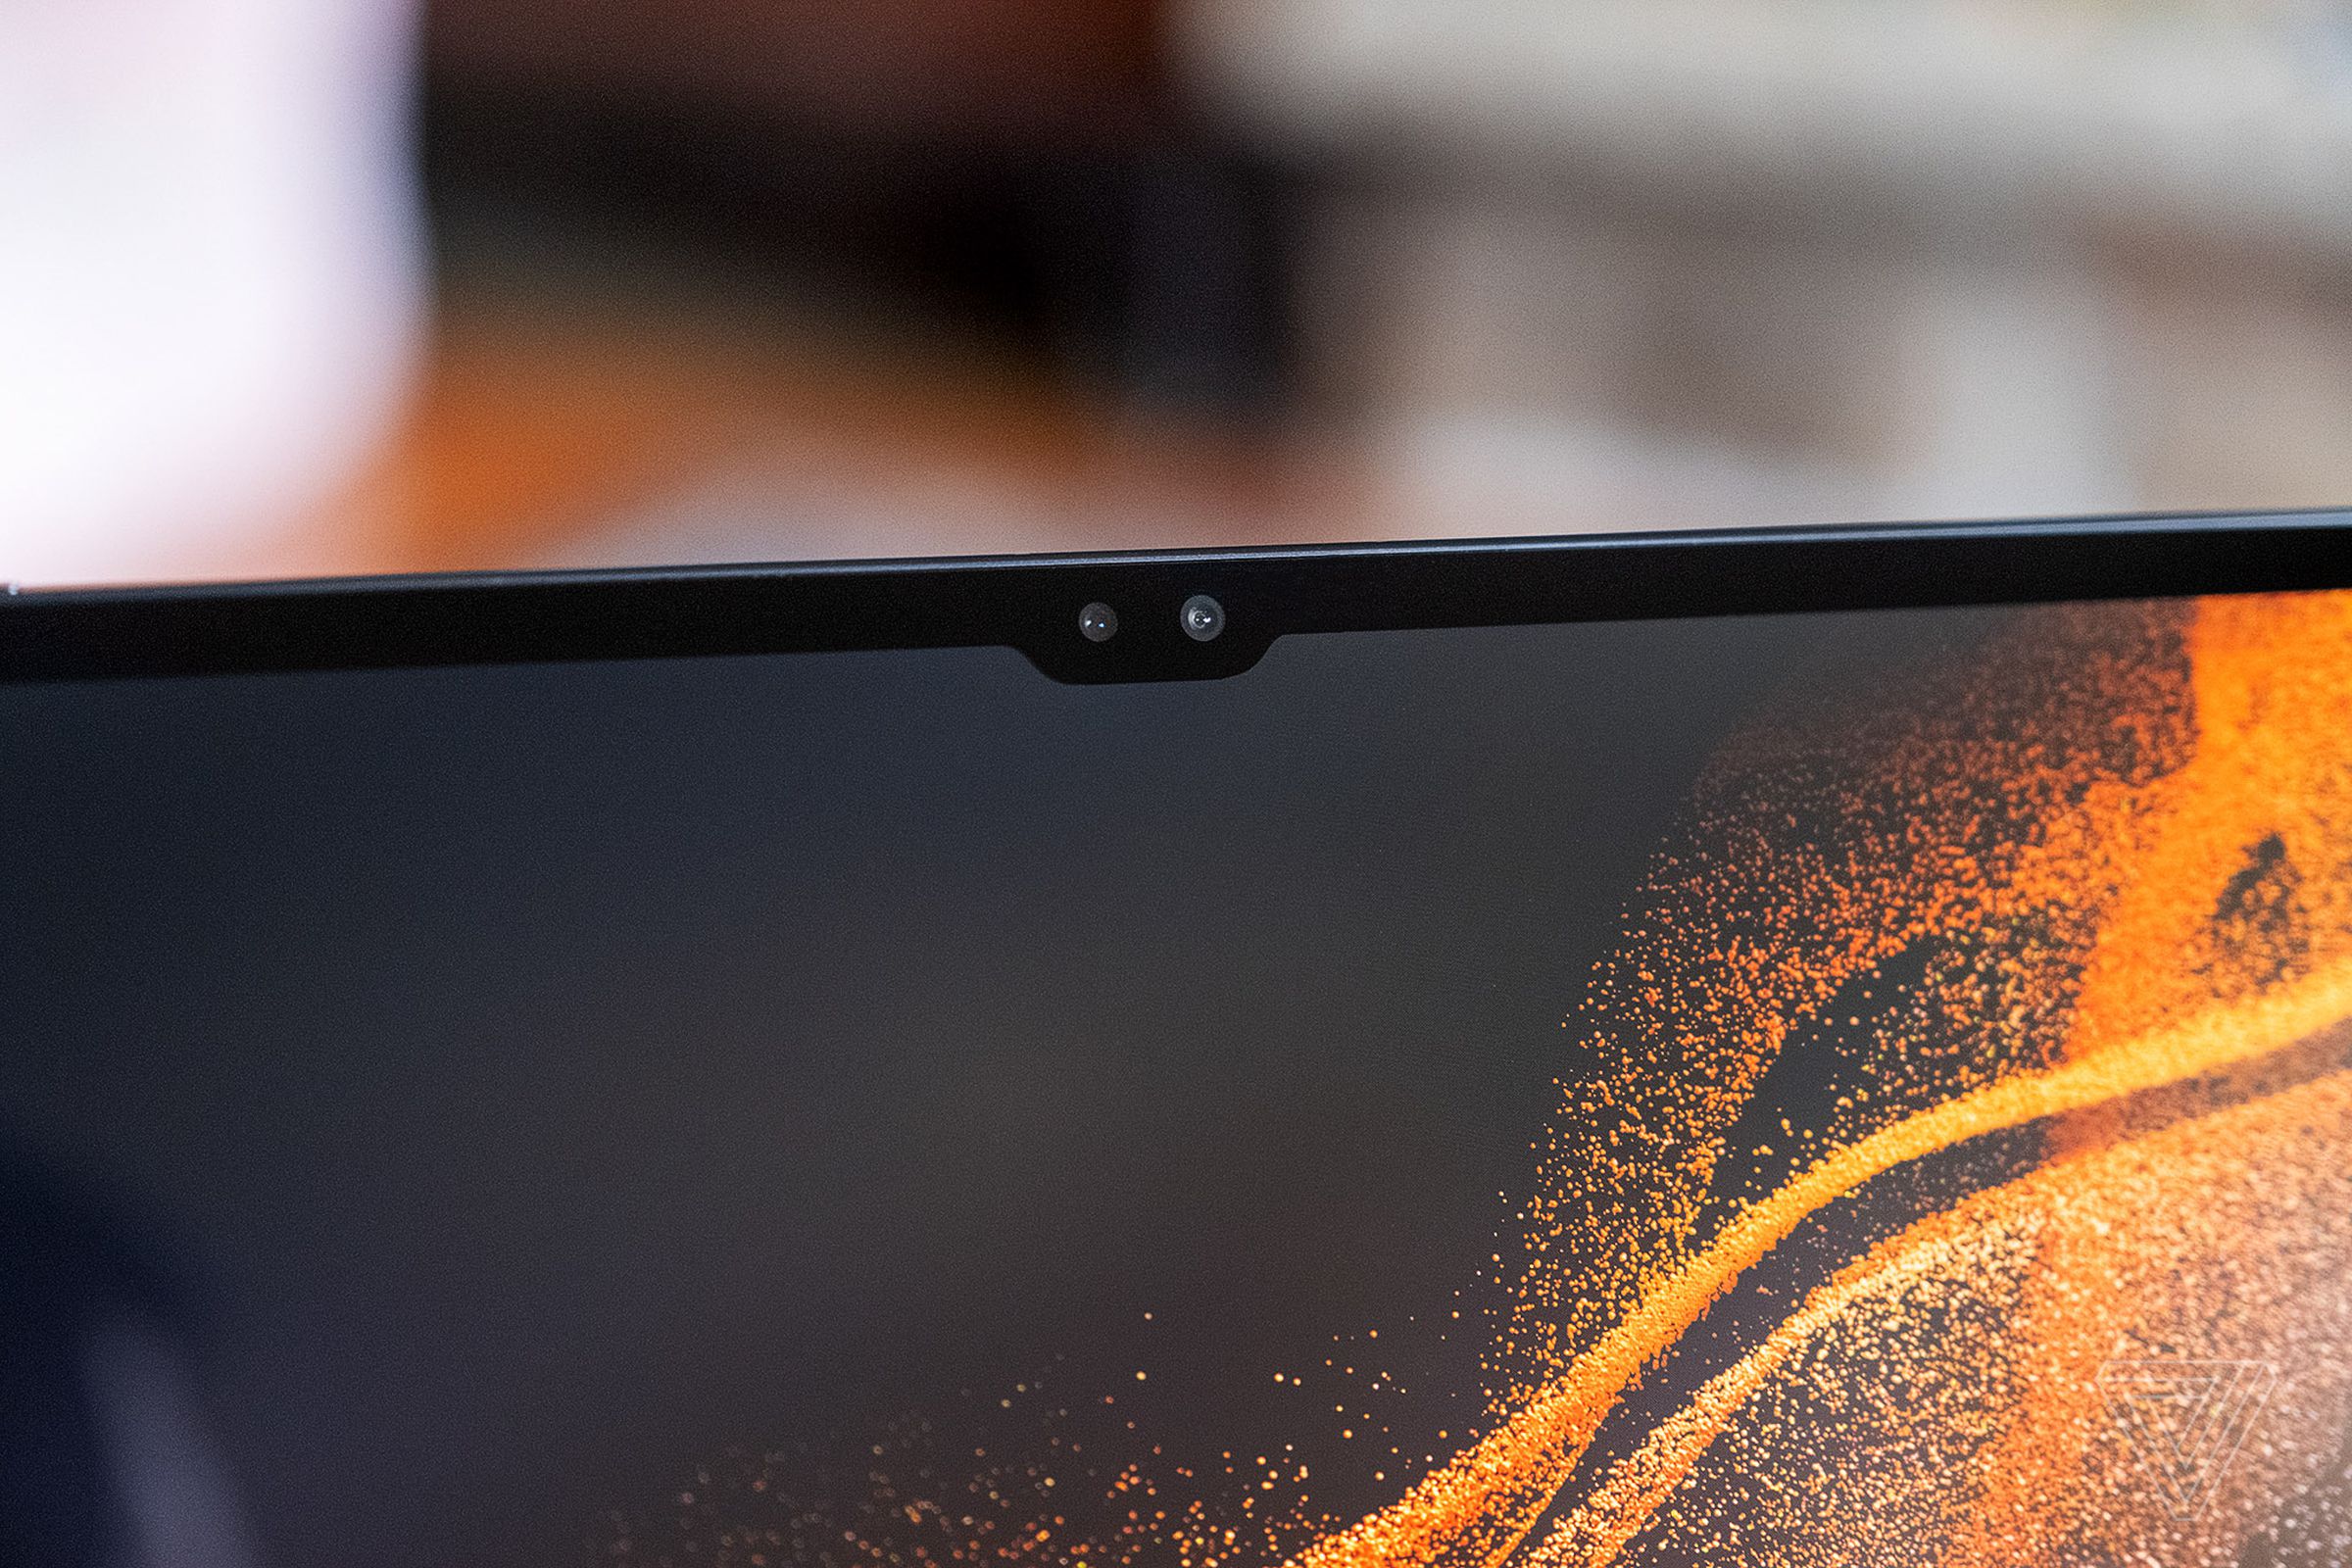 The Tab S8 Ultra has two front cameras for video calls.